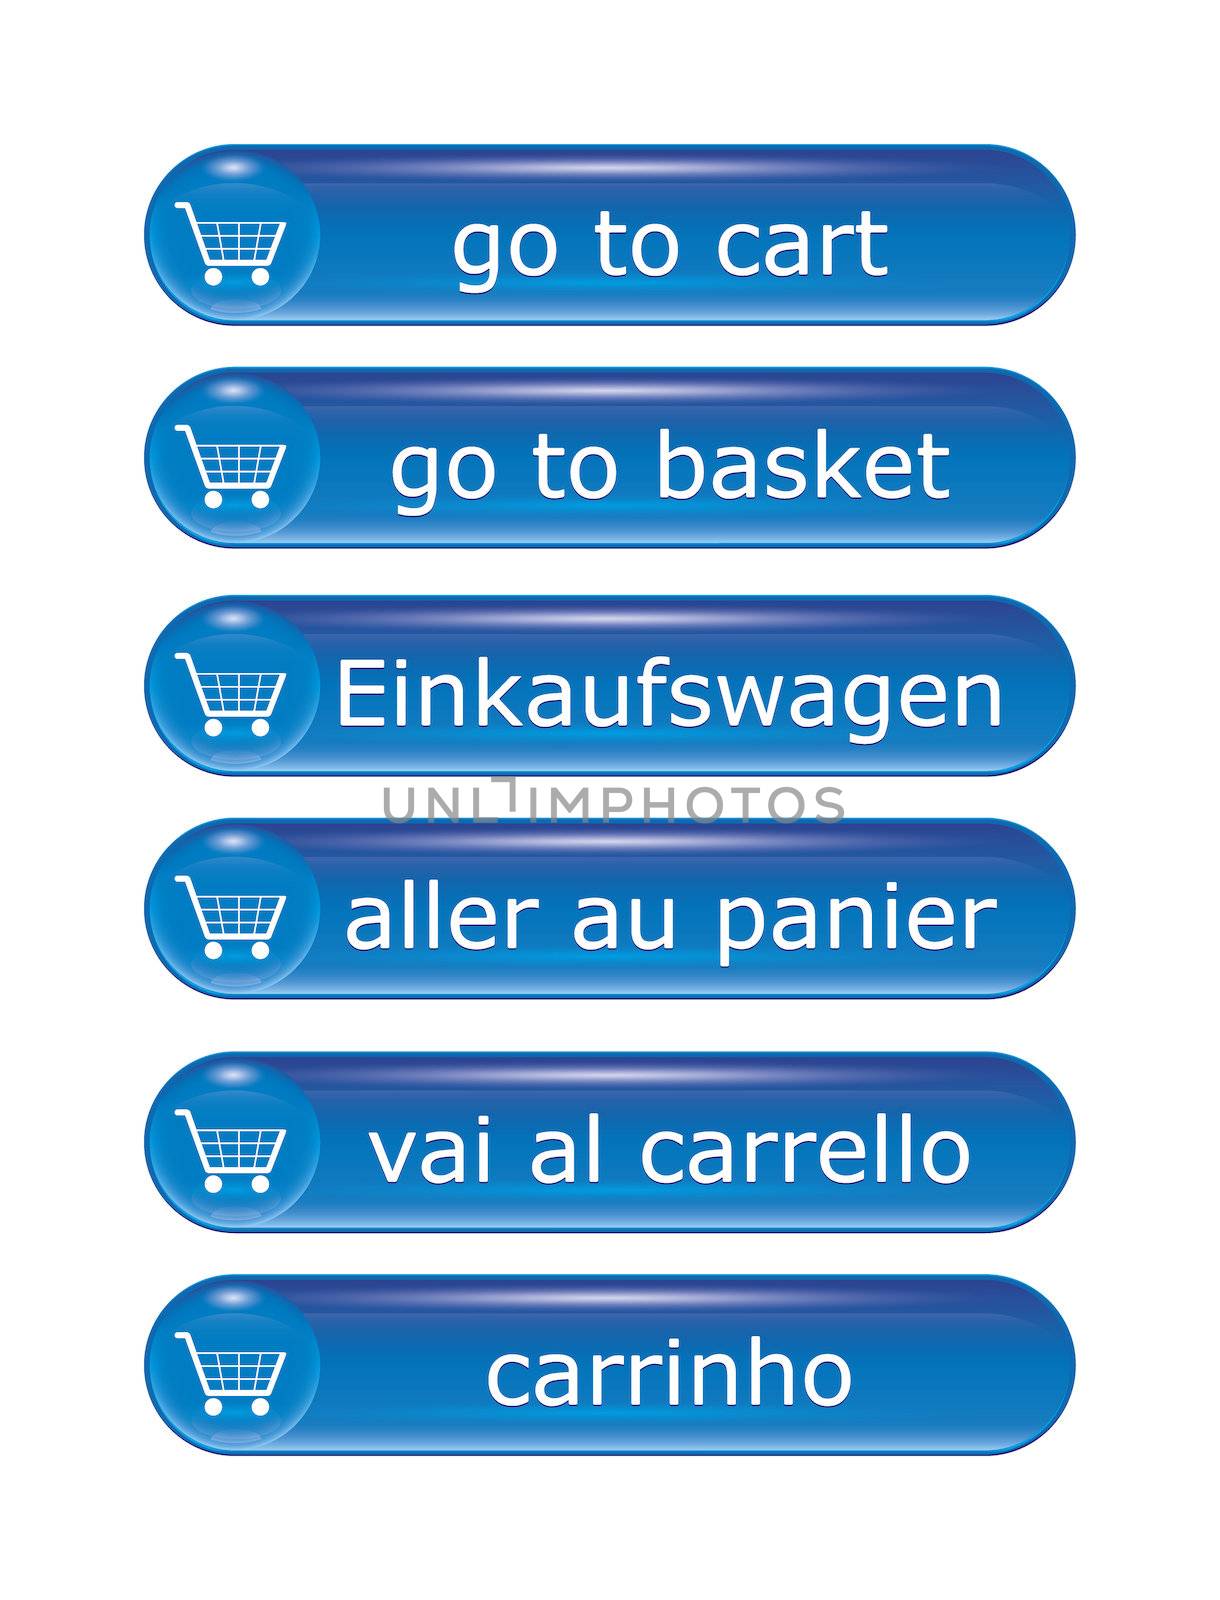 An image of shopping icons in different languages